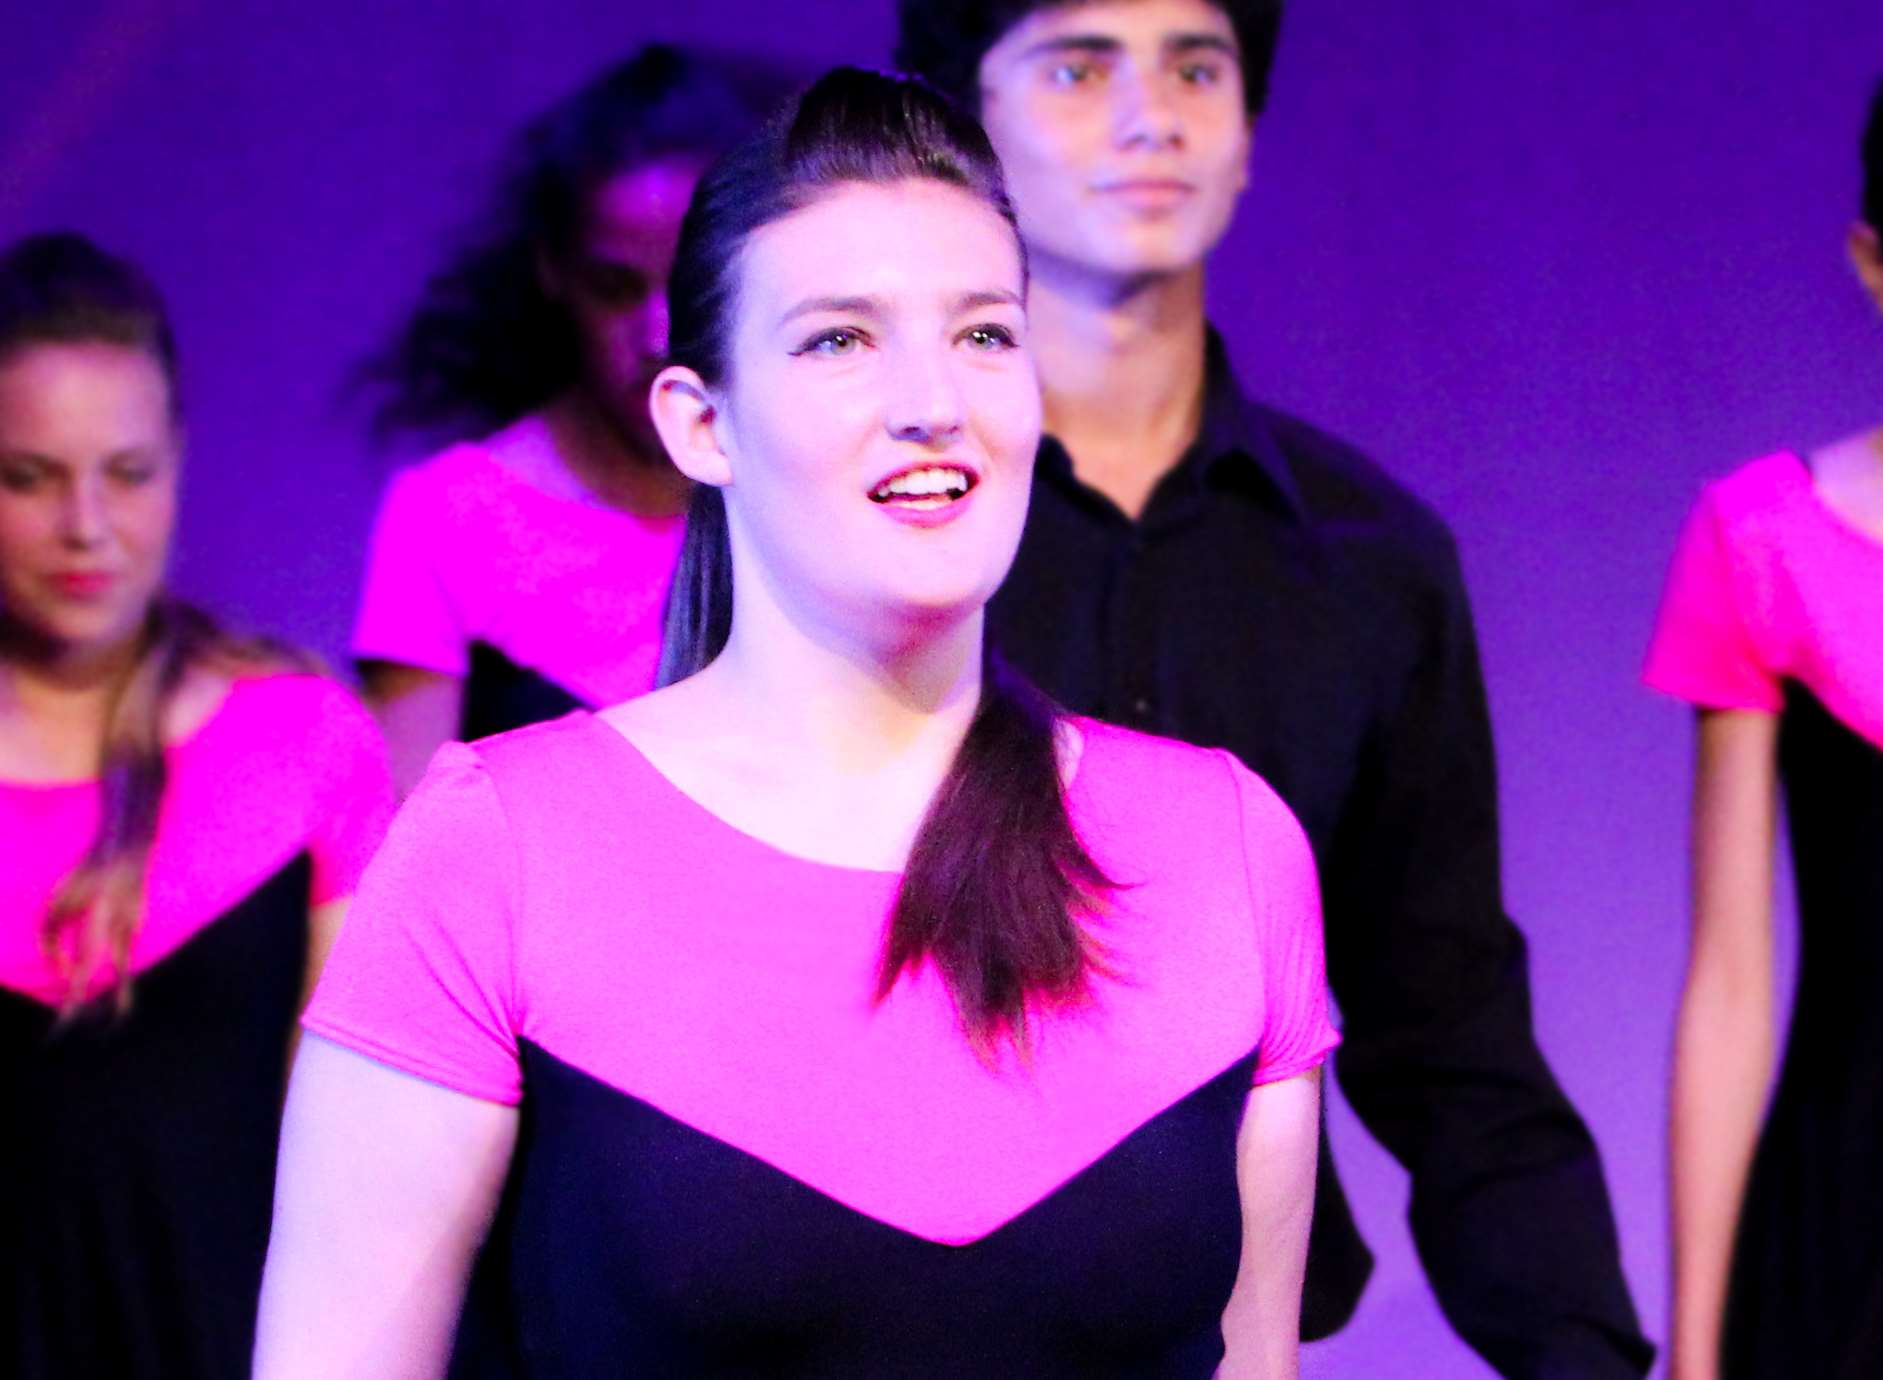 Zoe Howlett, 16, from Canadian Avenue, Gillingham, has won a coveted place with West End Kids, the UK's best known musical theatre song and dance troupe.